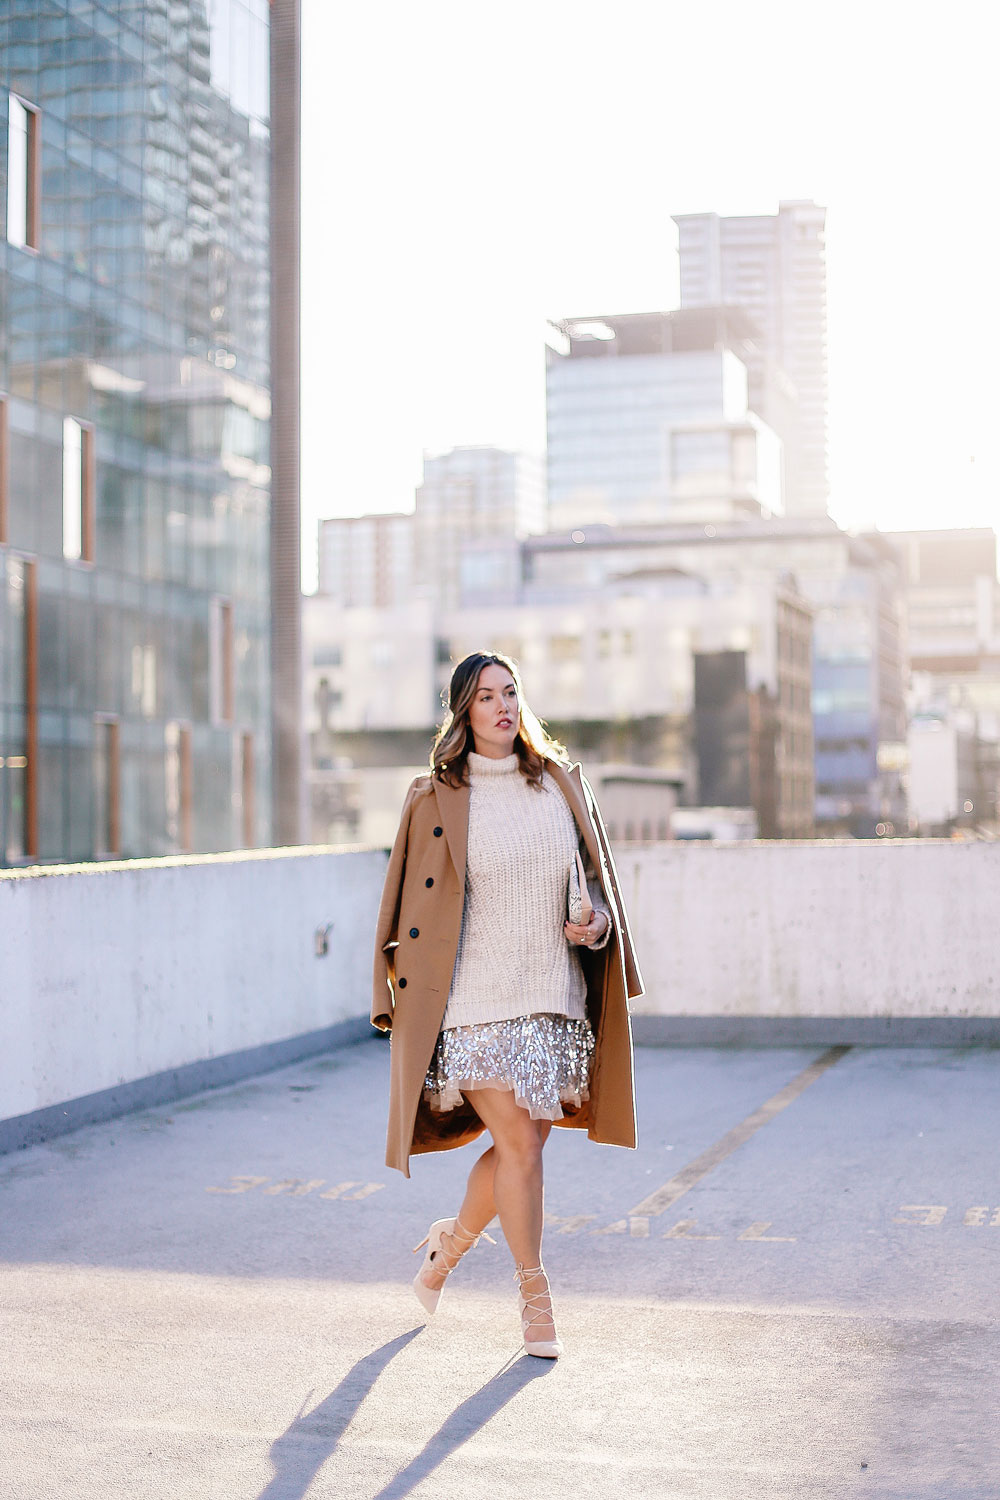 Holiday style tips in a Free People sequin dress, Sanctuary knit sweater, Raye lace up heels, Aritzia camel wool coat and Ted Baker blush clutch styled by To Vogue or Bust